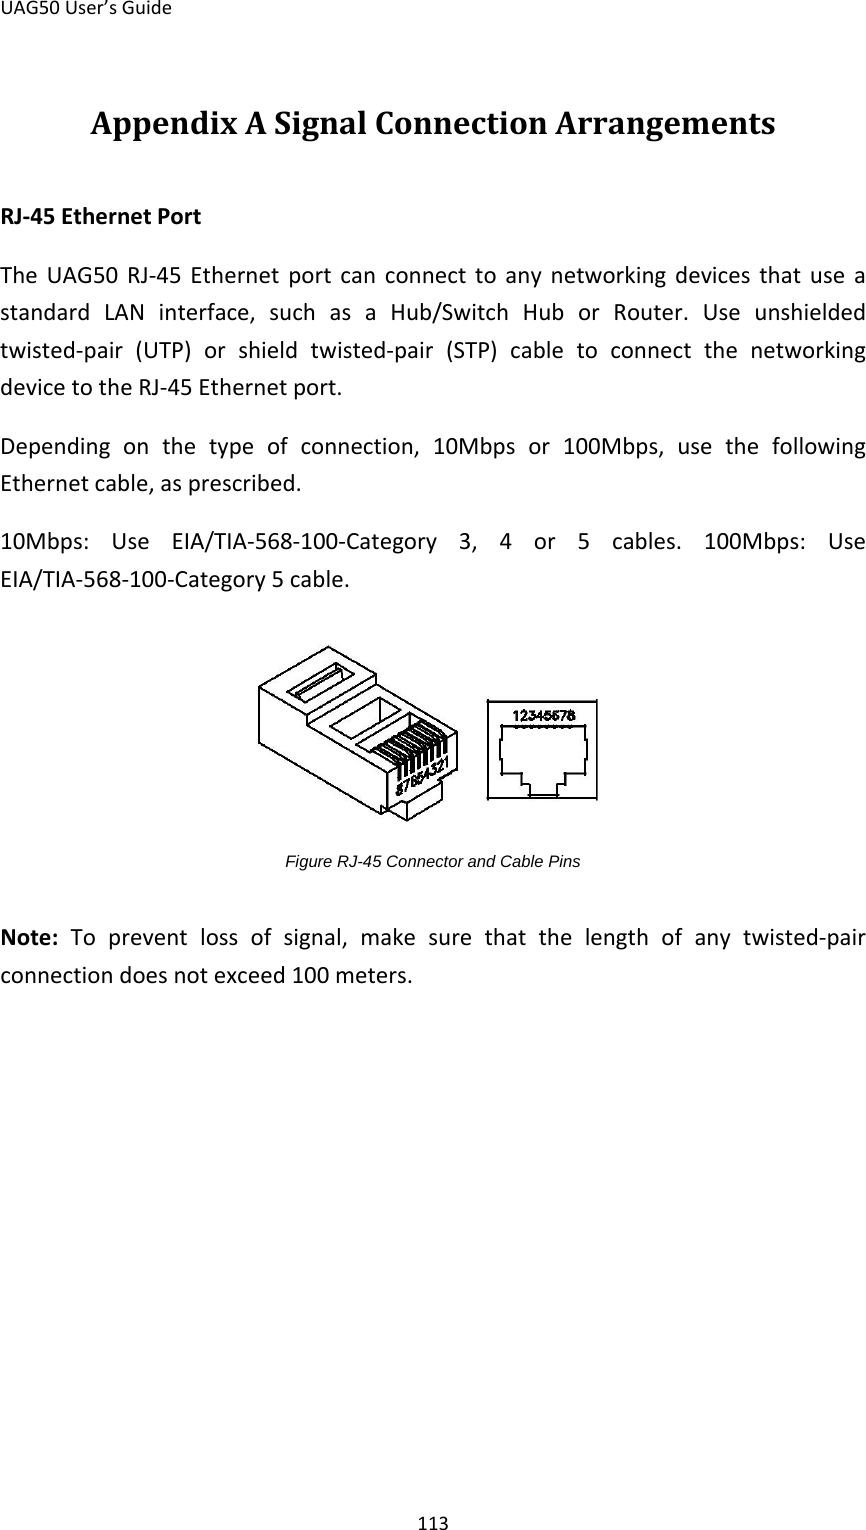 UAG50 User’s Guide 113 Appendix A Signal Connection Arrangements RJ-45 Ethernet Port The  UAG50 RJ-45 Ethernet port can connect to any networking devices that use a standard LAN interface, such as a Hub/Switch Hub or Router. Use unshielded twisted-pair (UTP) or shield twisted-pair (STP) cable to connect the networking device to the RJ-45 Ethernet port. Depending on the type of connection, 10Mbps or 100Mbps, use the following Ethernet cable, as prescribed. 10Mbps: Use EIA/TIA-568-100-Category 3, 4 or 5 cables. 100Mbps: Use EIA/TIA-568-100-Category 5 cable.       Figure RJ-45 Connector and Cable Pins  Note:  To prevent loss of signal, make sure that the length of any twisted-pair connection does not exceed 100 meters. 